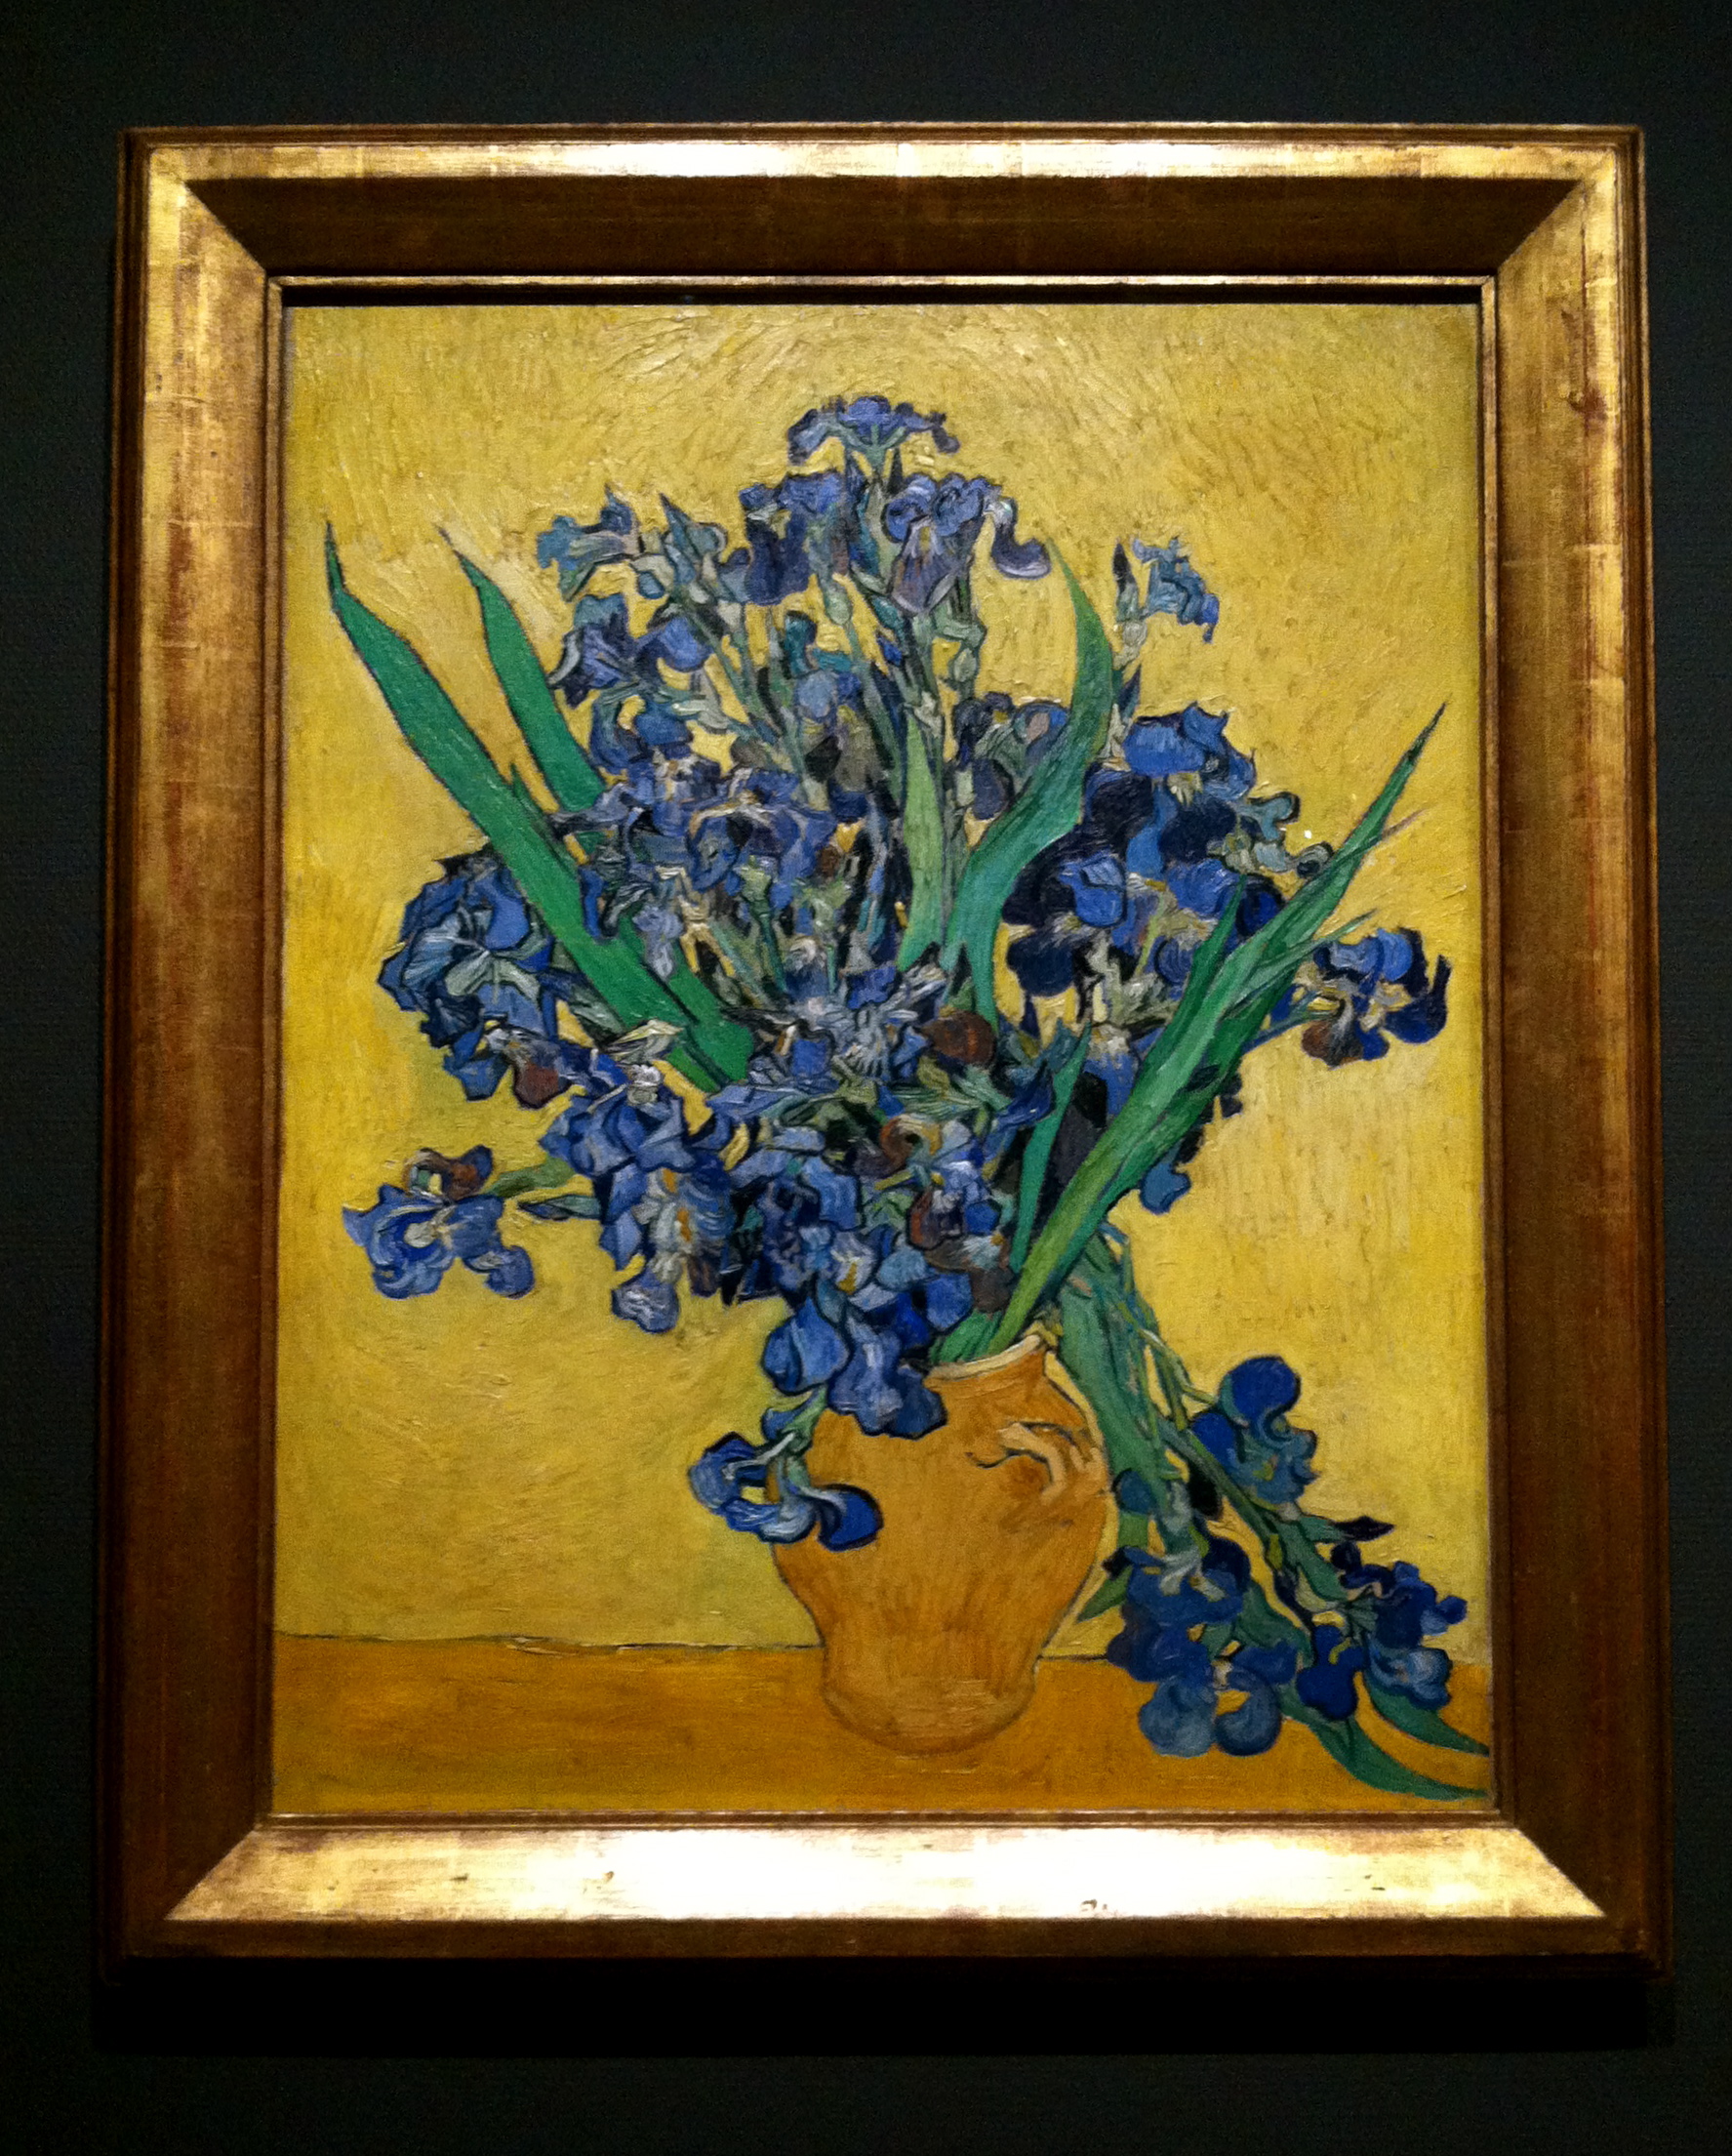 This is one of my favorites from the Van Gogh museum. This might also be one of the pieces that I was NOT supposed to photograph.